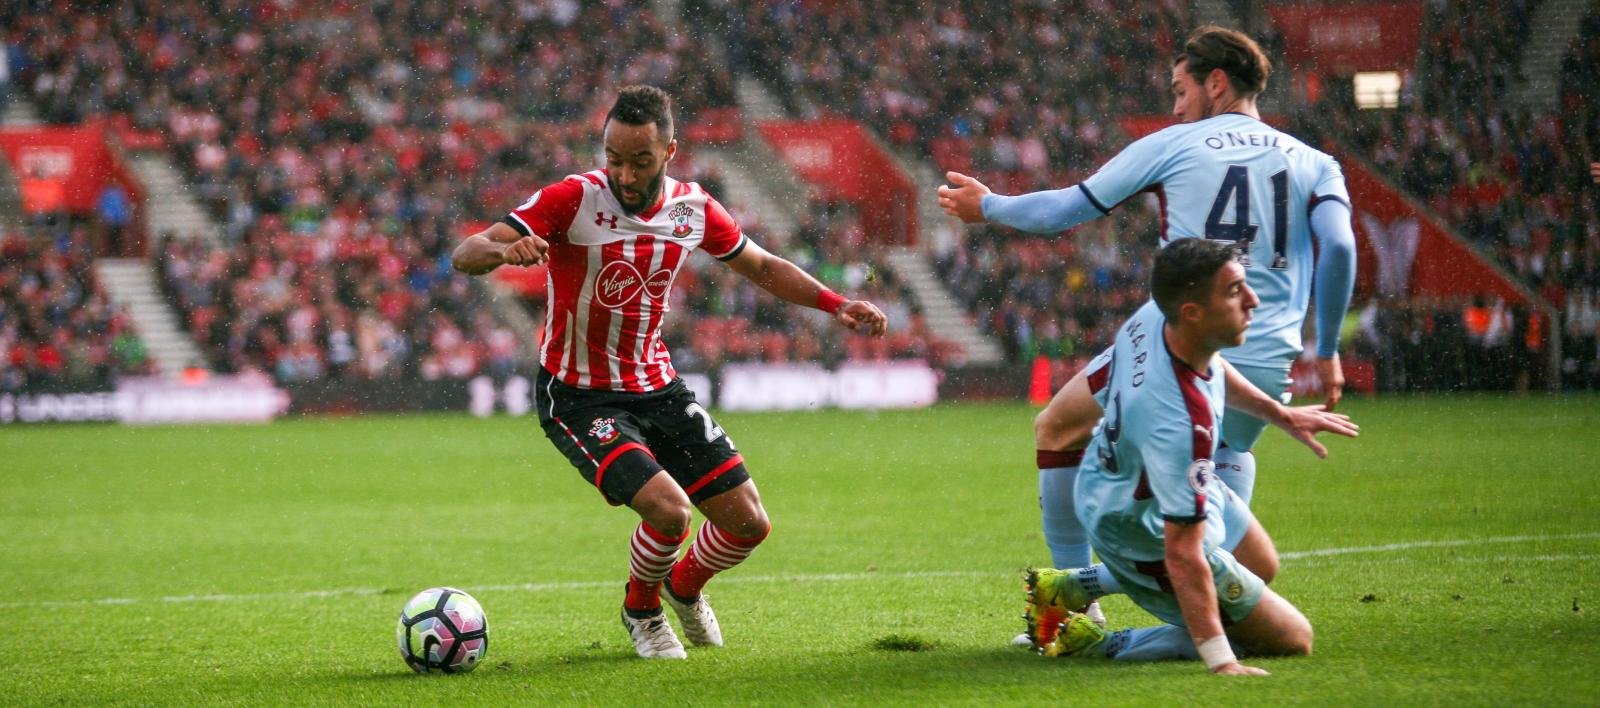 5 things we learned from Southampton v Burnley